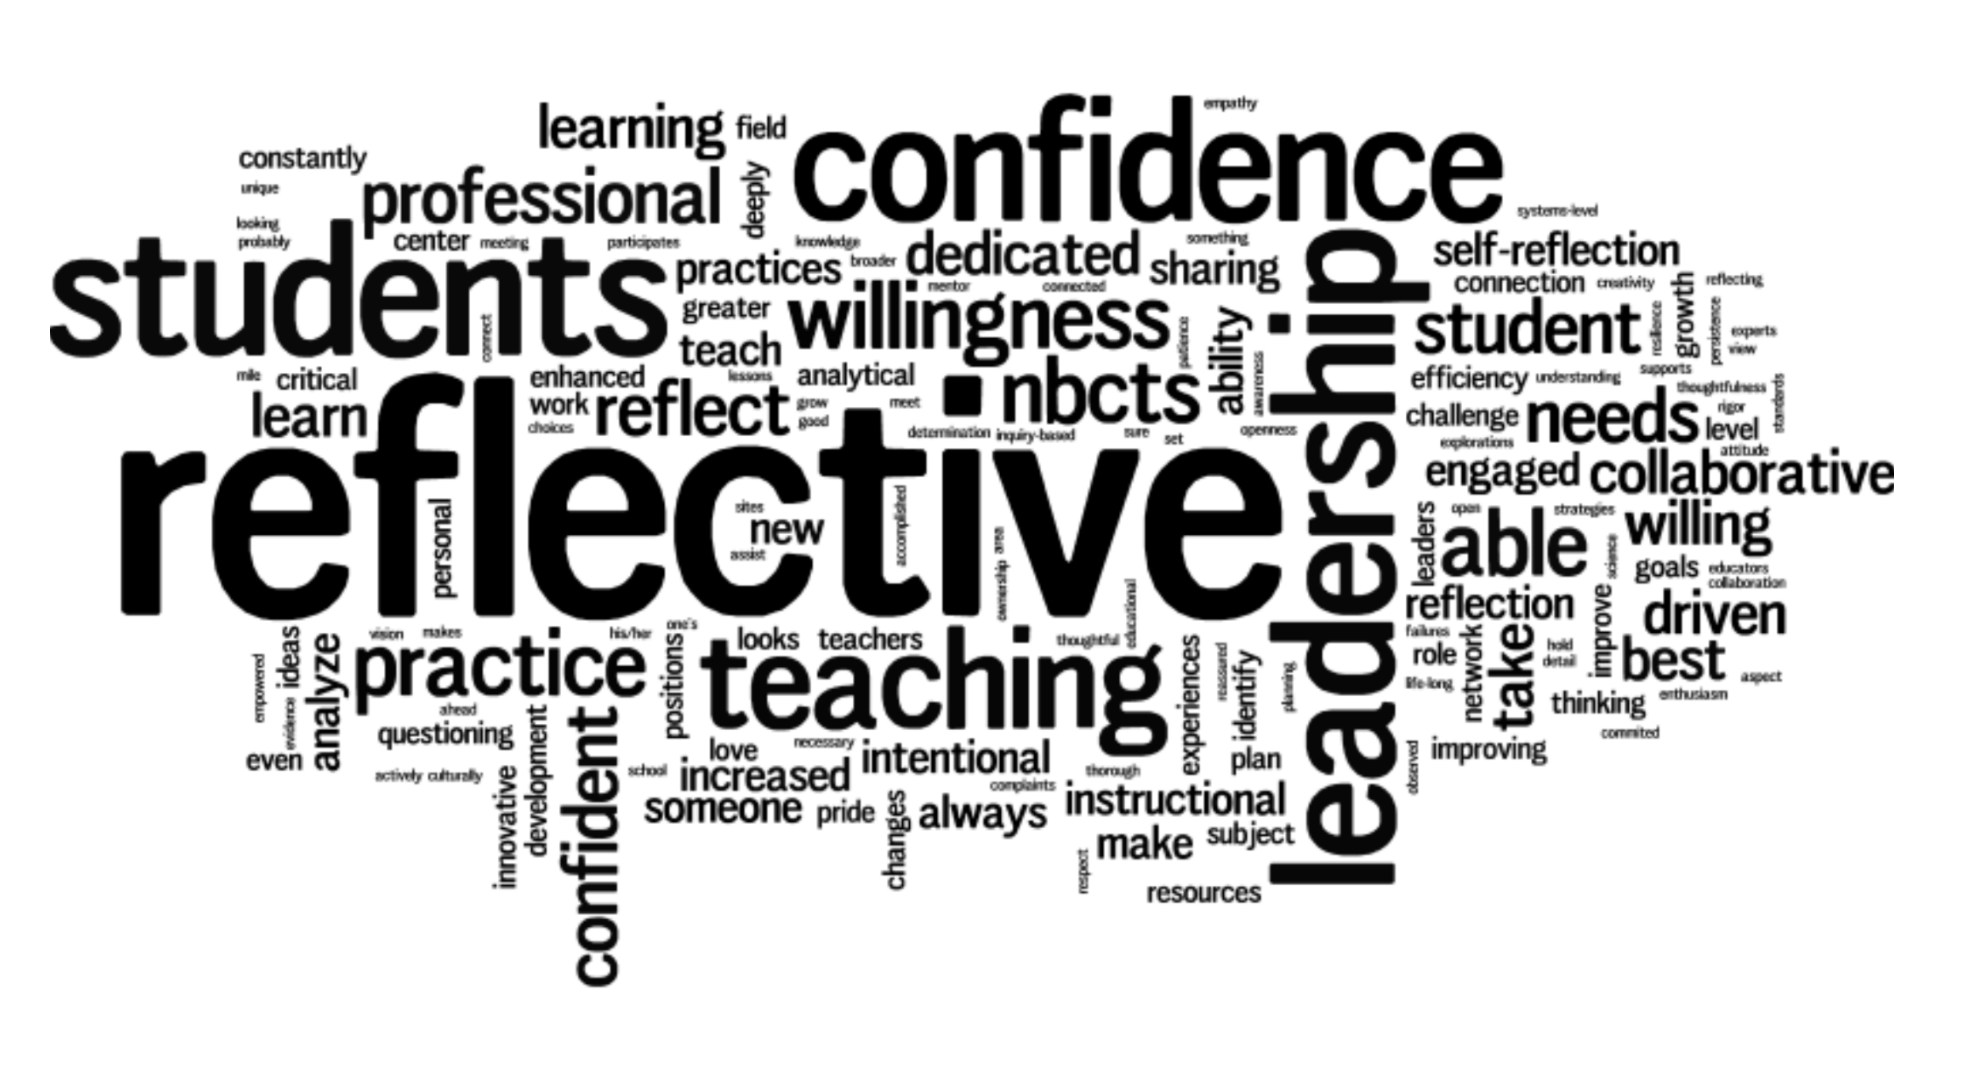 Wordle visual of words used to describe certification. Reflective, Students, leadership, confidence, etc., 